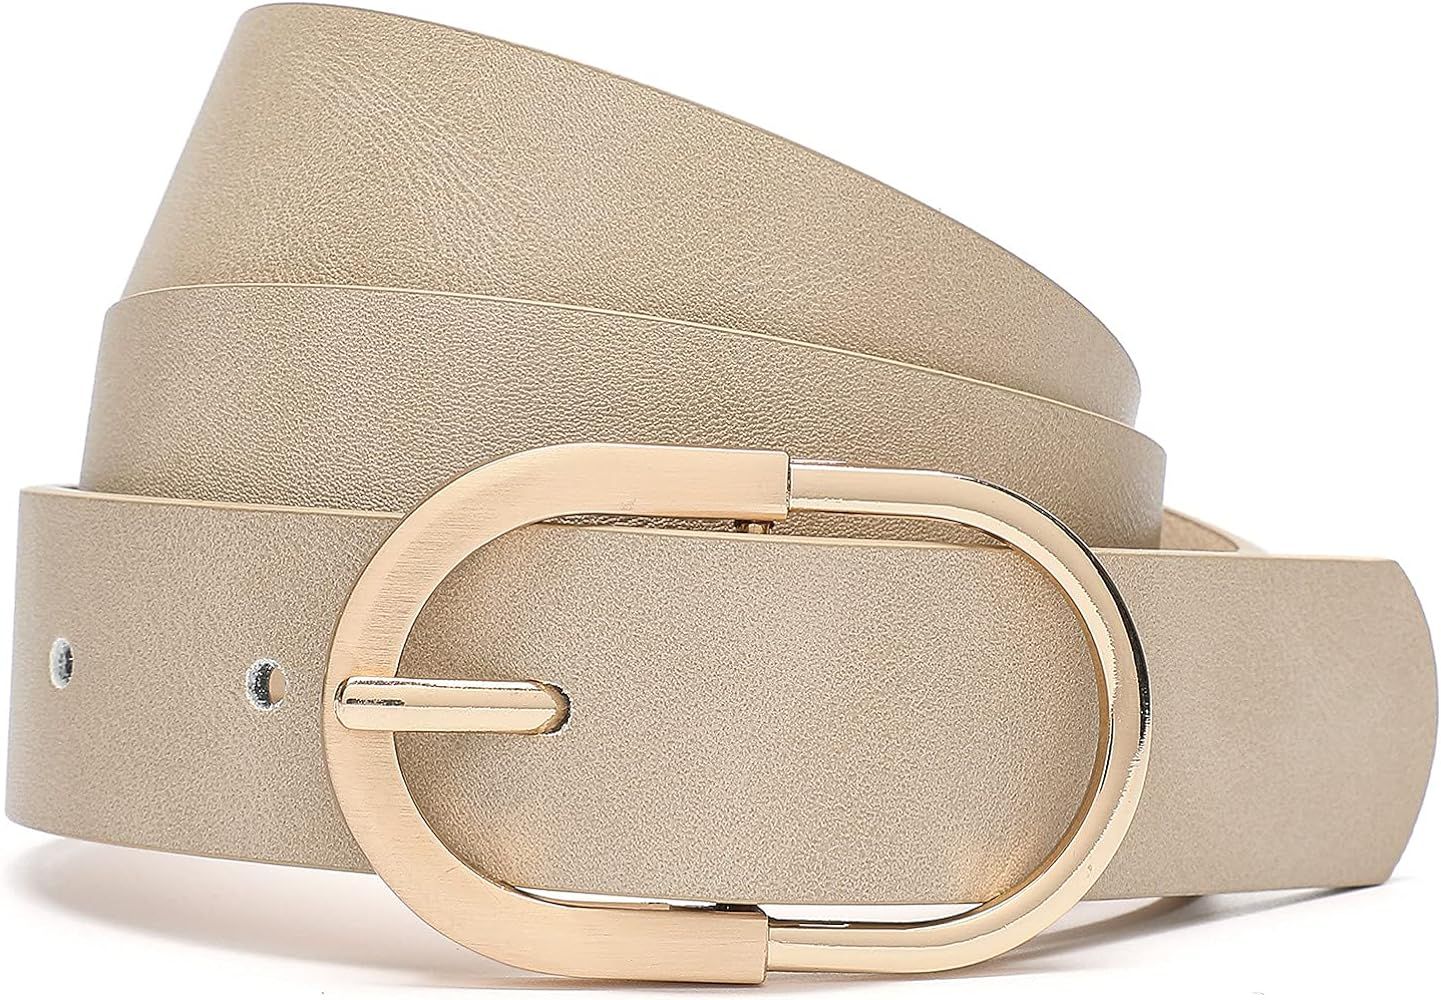 Tanpie Womens Leather Waist Belts for Jeans Pants with Gold Buckle | Amazon (US)